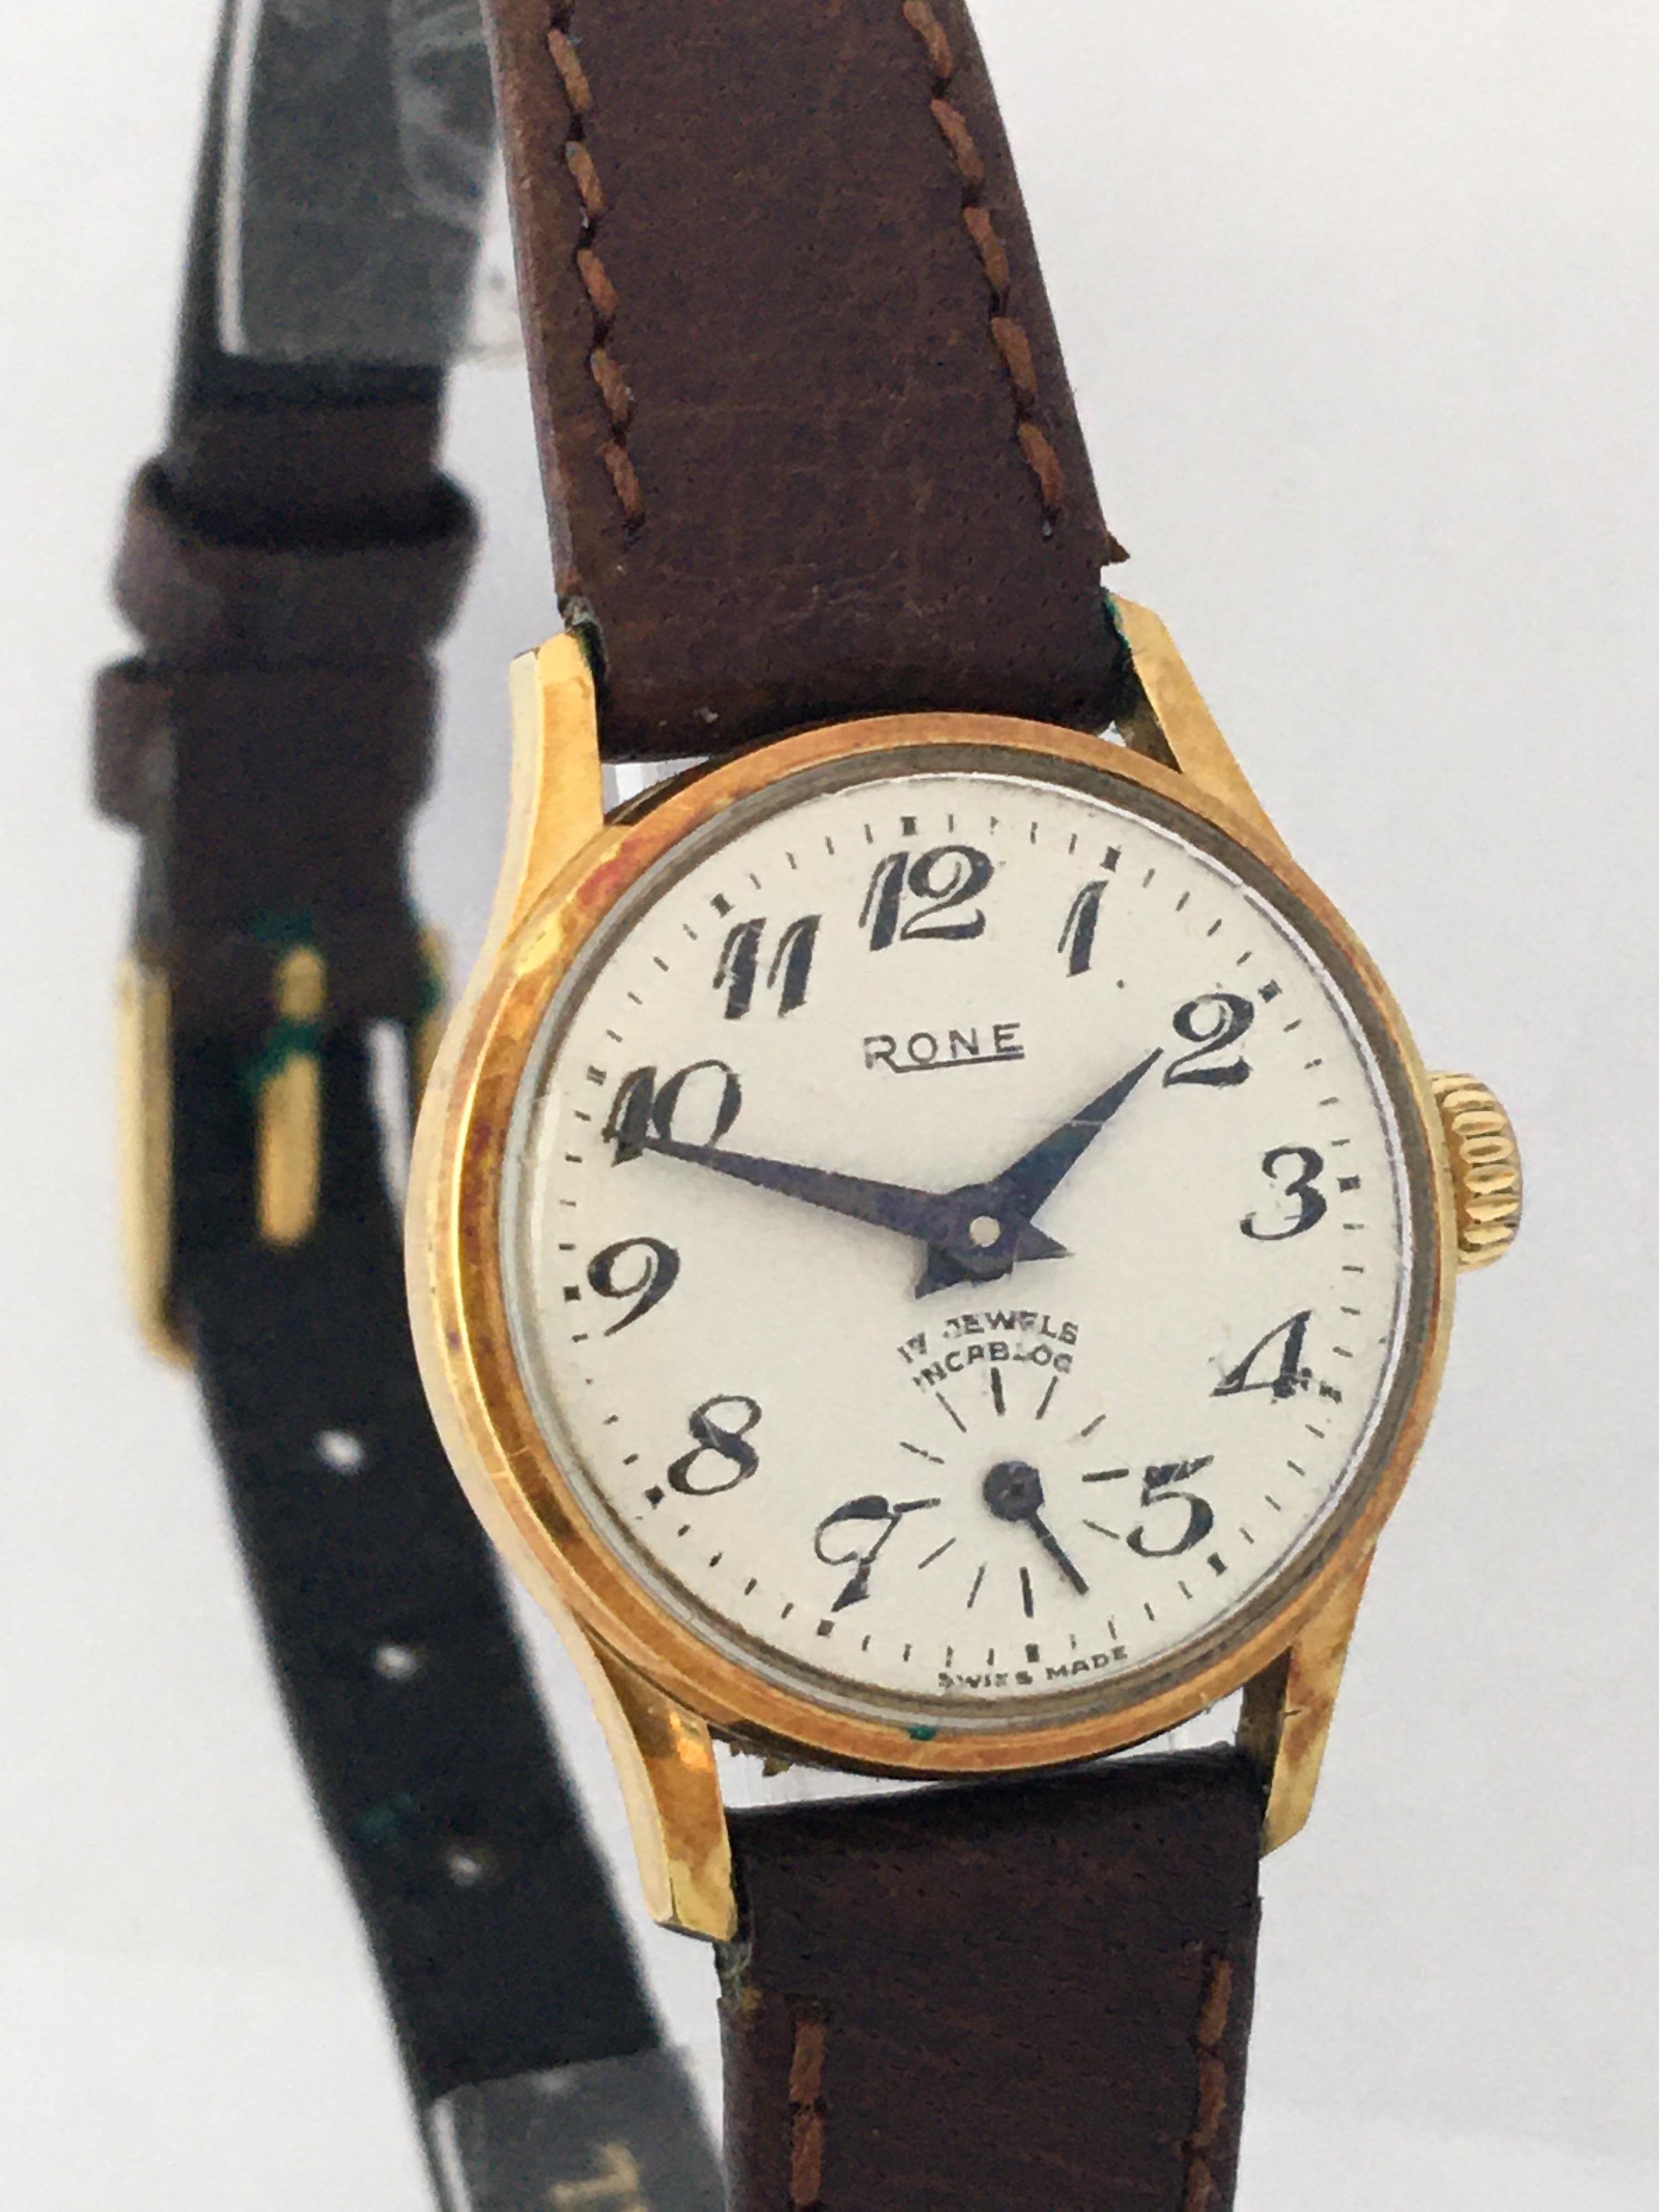 This beautiful and small vintage Swiss hand winding watch is in good condition and it is in full working order and it is running well. Visible signs of ageing and wear with some scratches on the glass and on the watch case as shown. Small